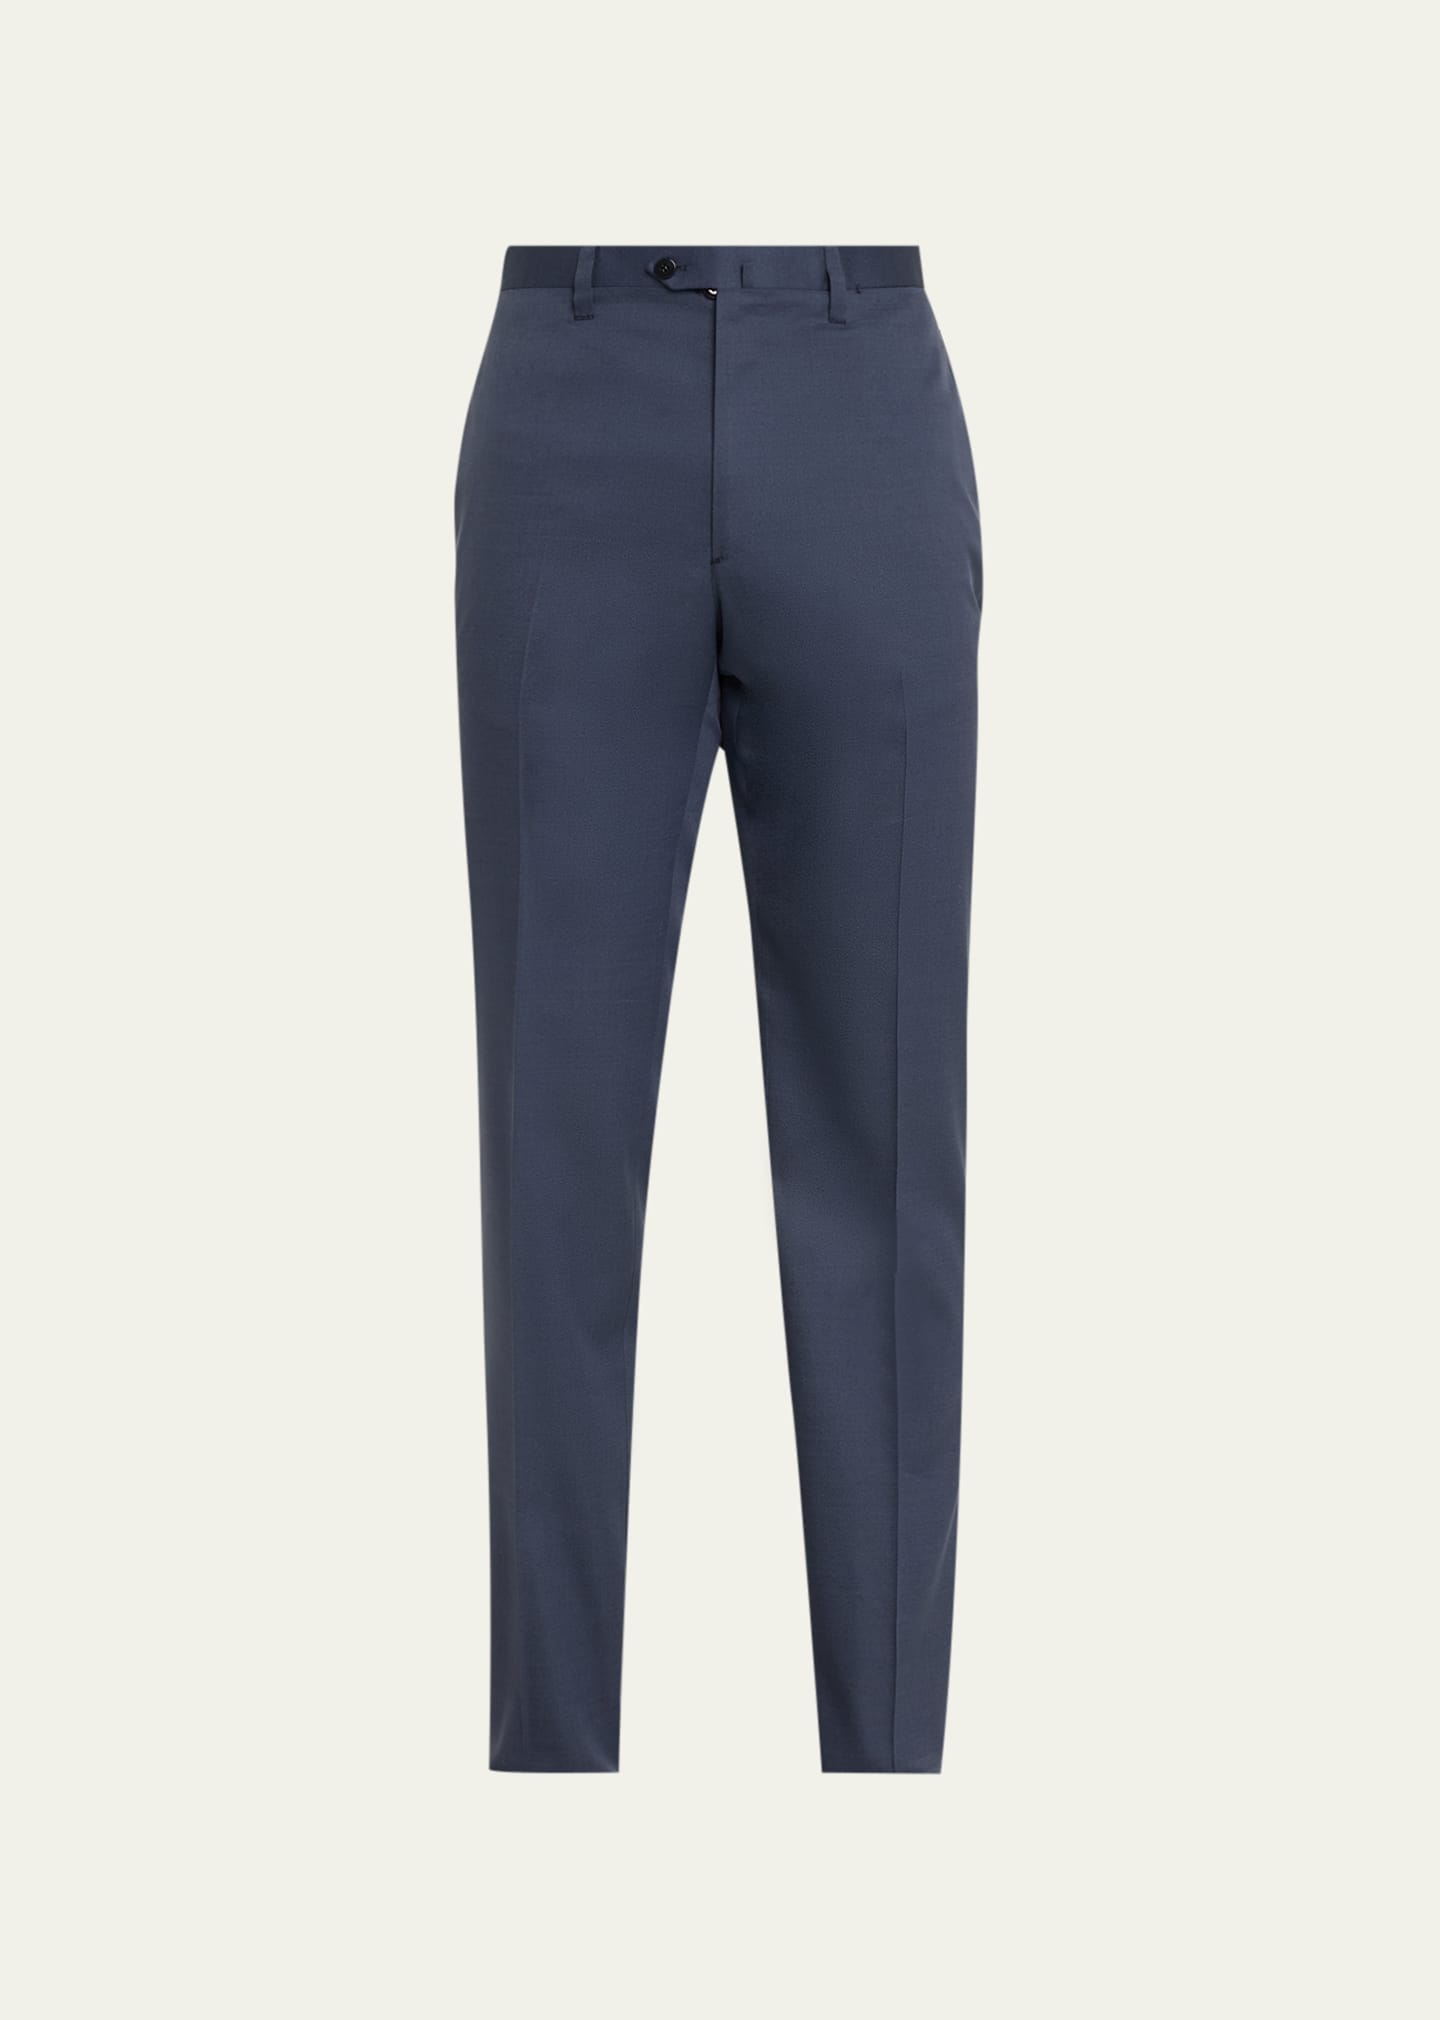 Cesare Attolini Men's Luxe Twill Flat-front Trousers In B31-navy